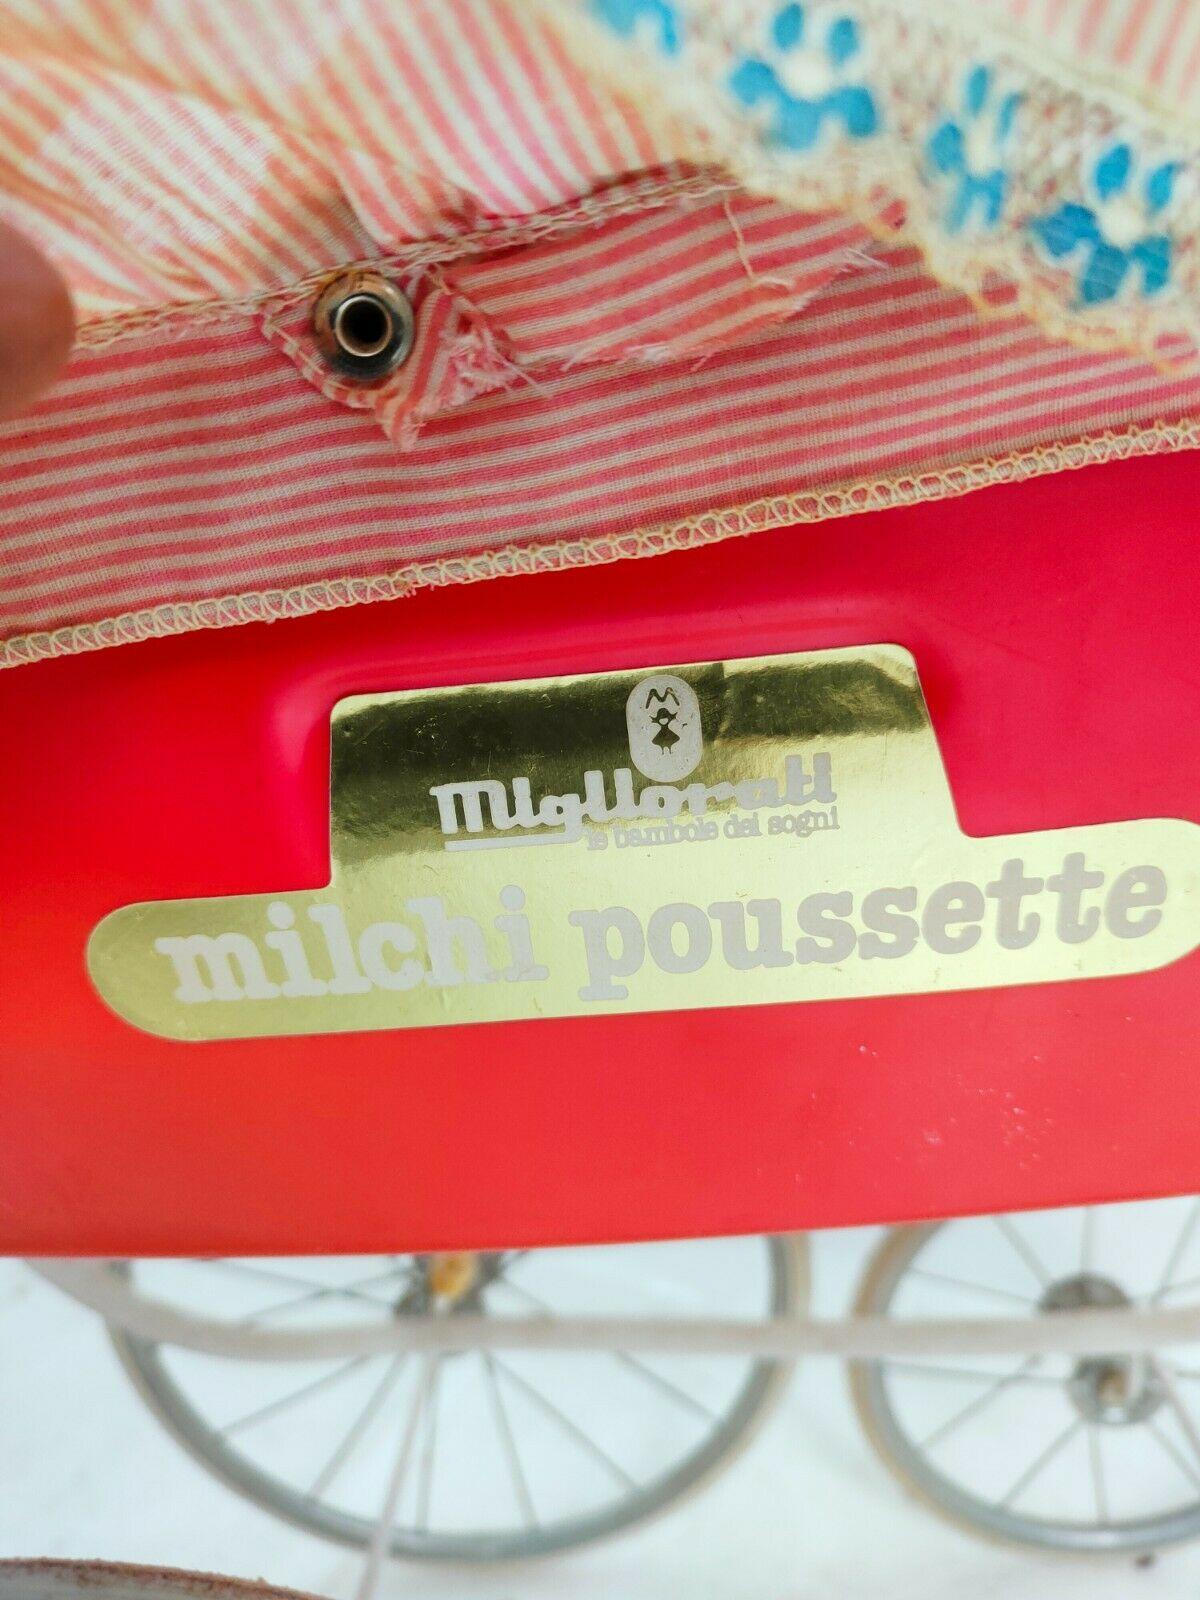 Extremely rare stroller and wheelchair Improved Milchi model Poussette series, characterized by the lifting system of the doll by means of a special command on the handlebar that worked like a small air pump

Measures approximately 1 meter in